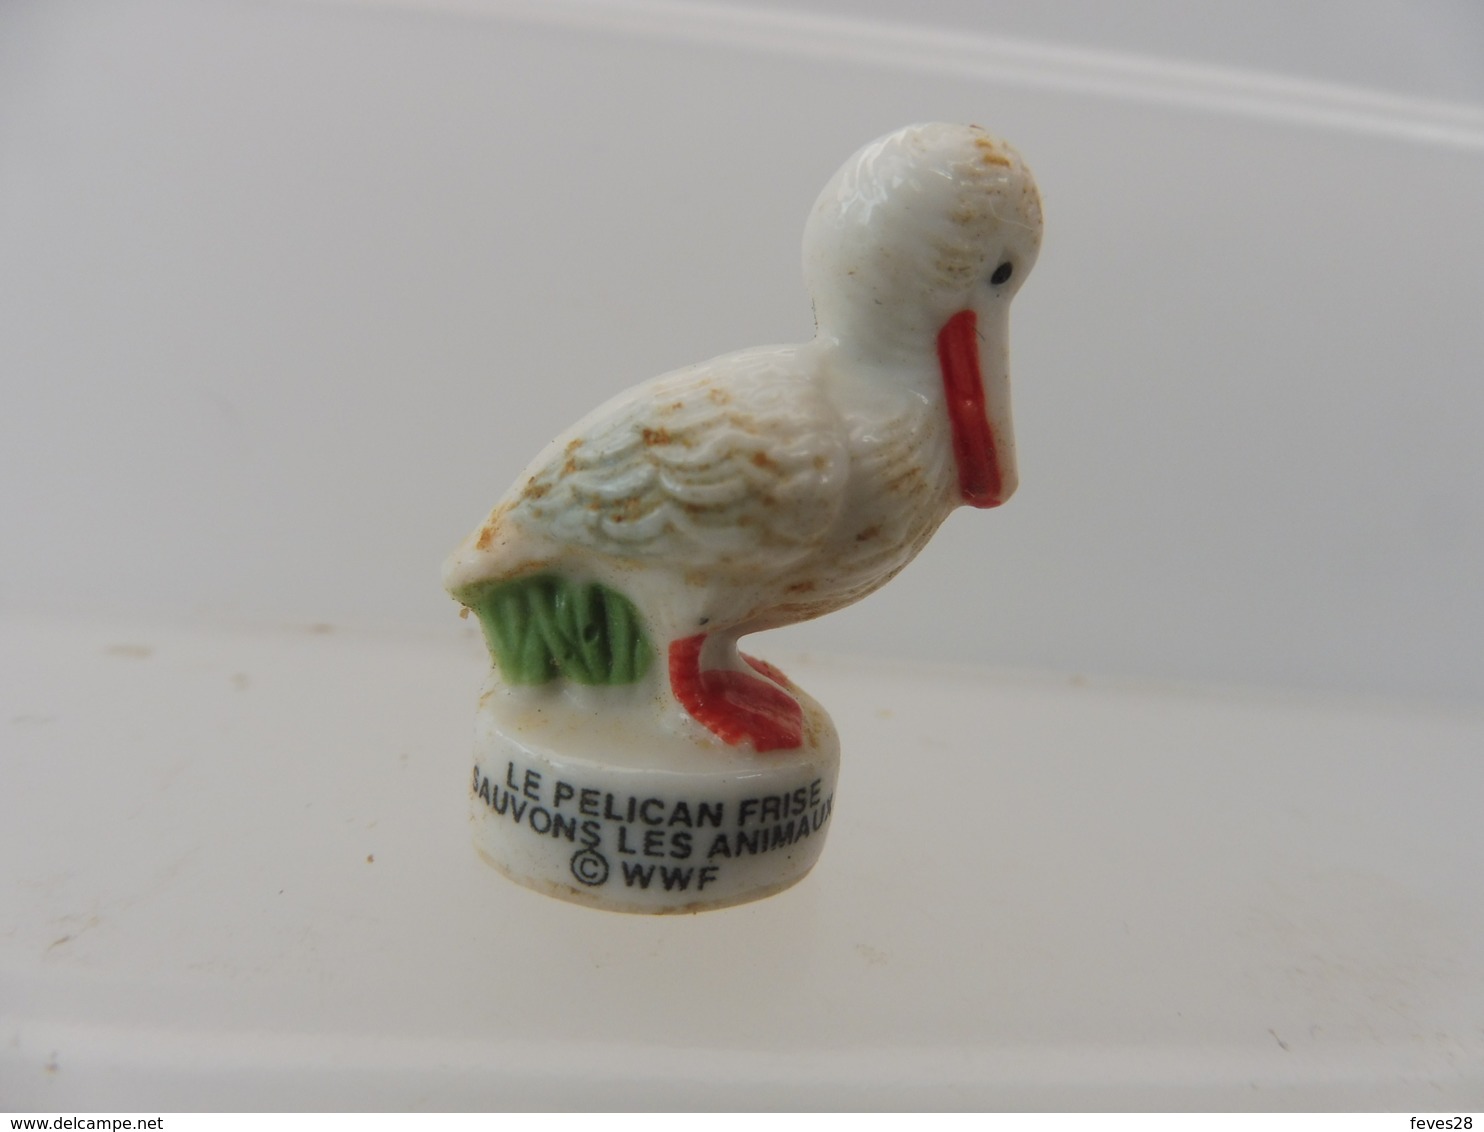 FEVE - 2001 - PERSO CARREFOUR - WWF - PELICAN FRISE - Animaux